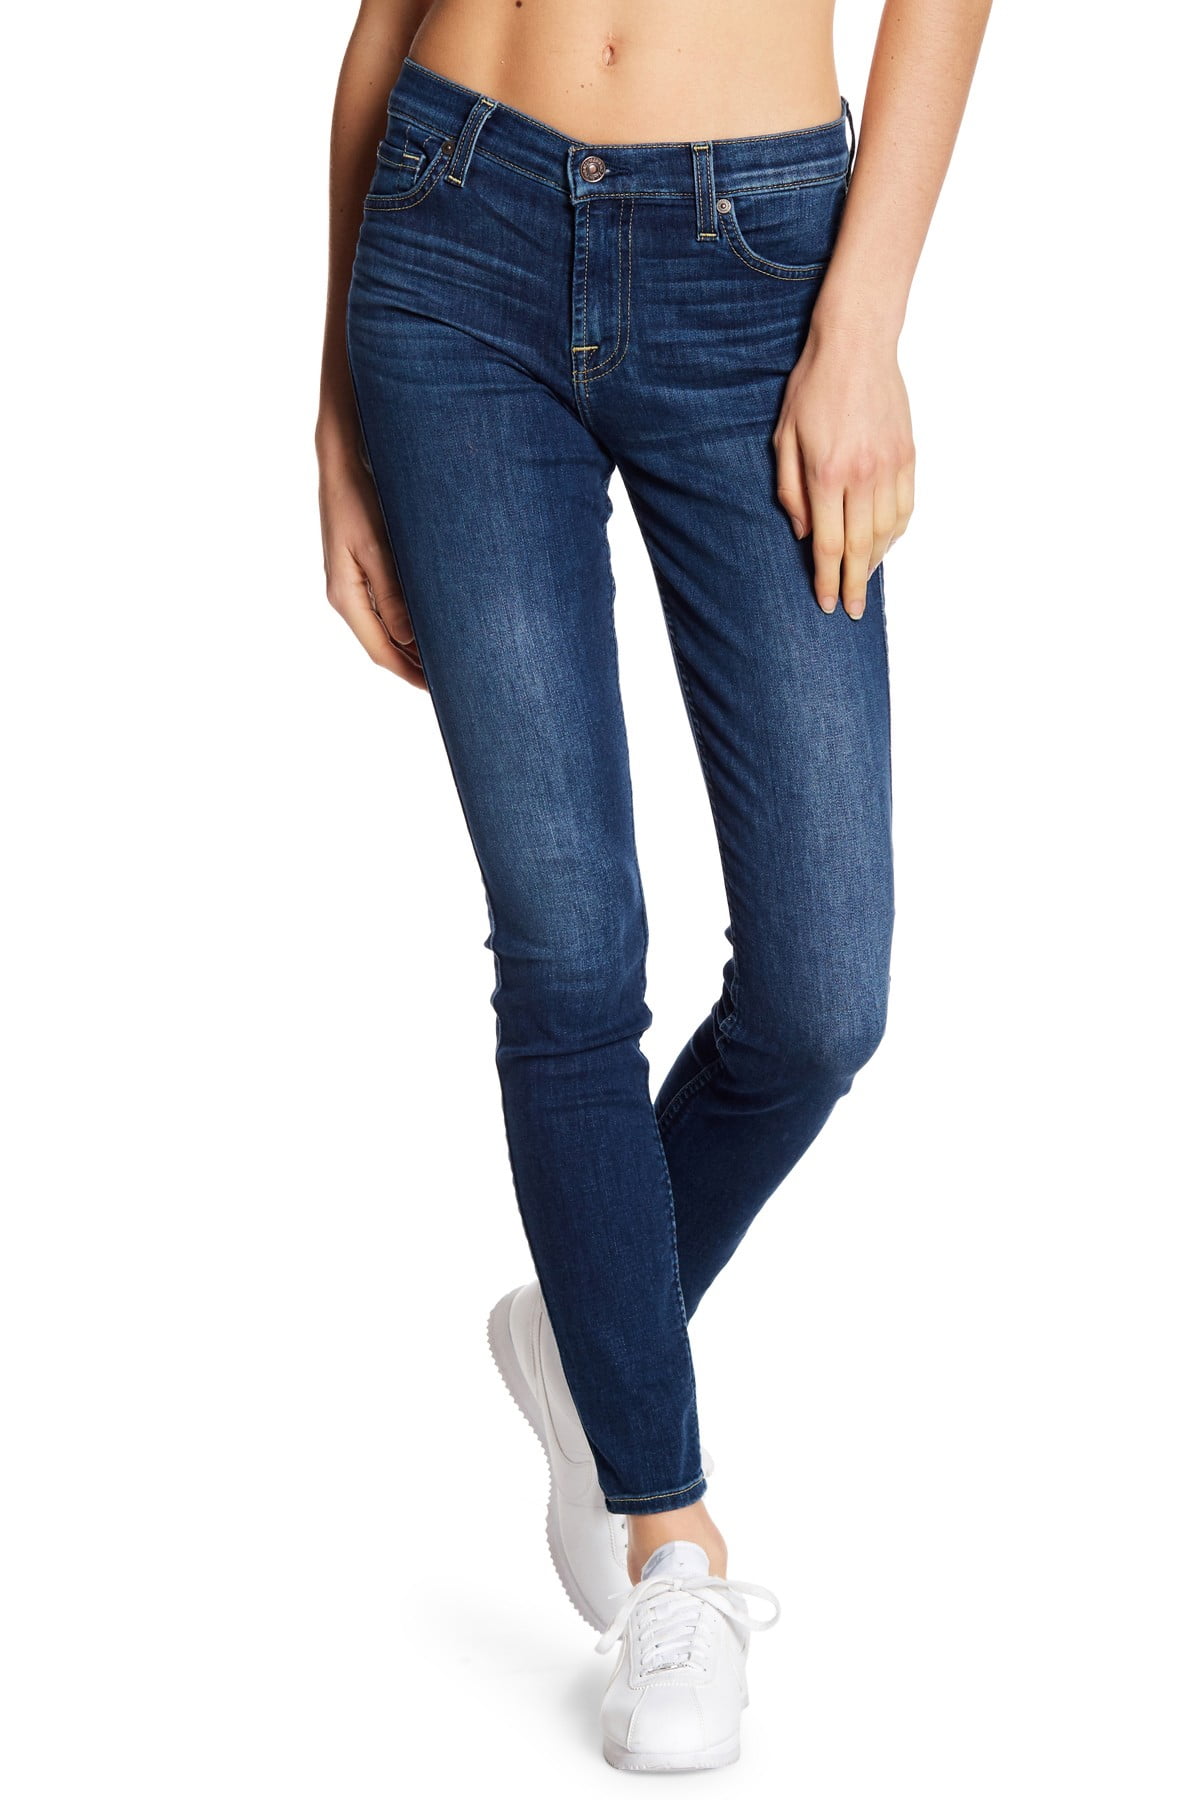 7 for all mankind gwenevere ankle jean